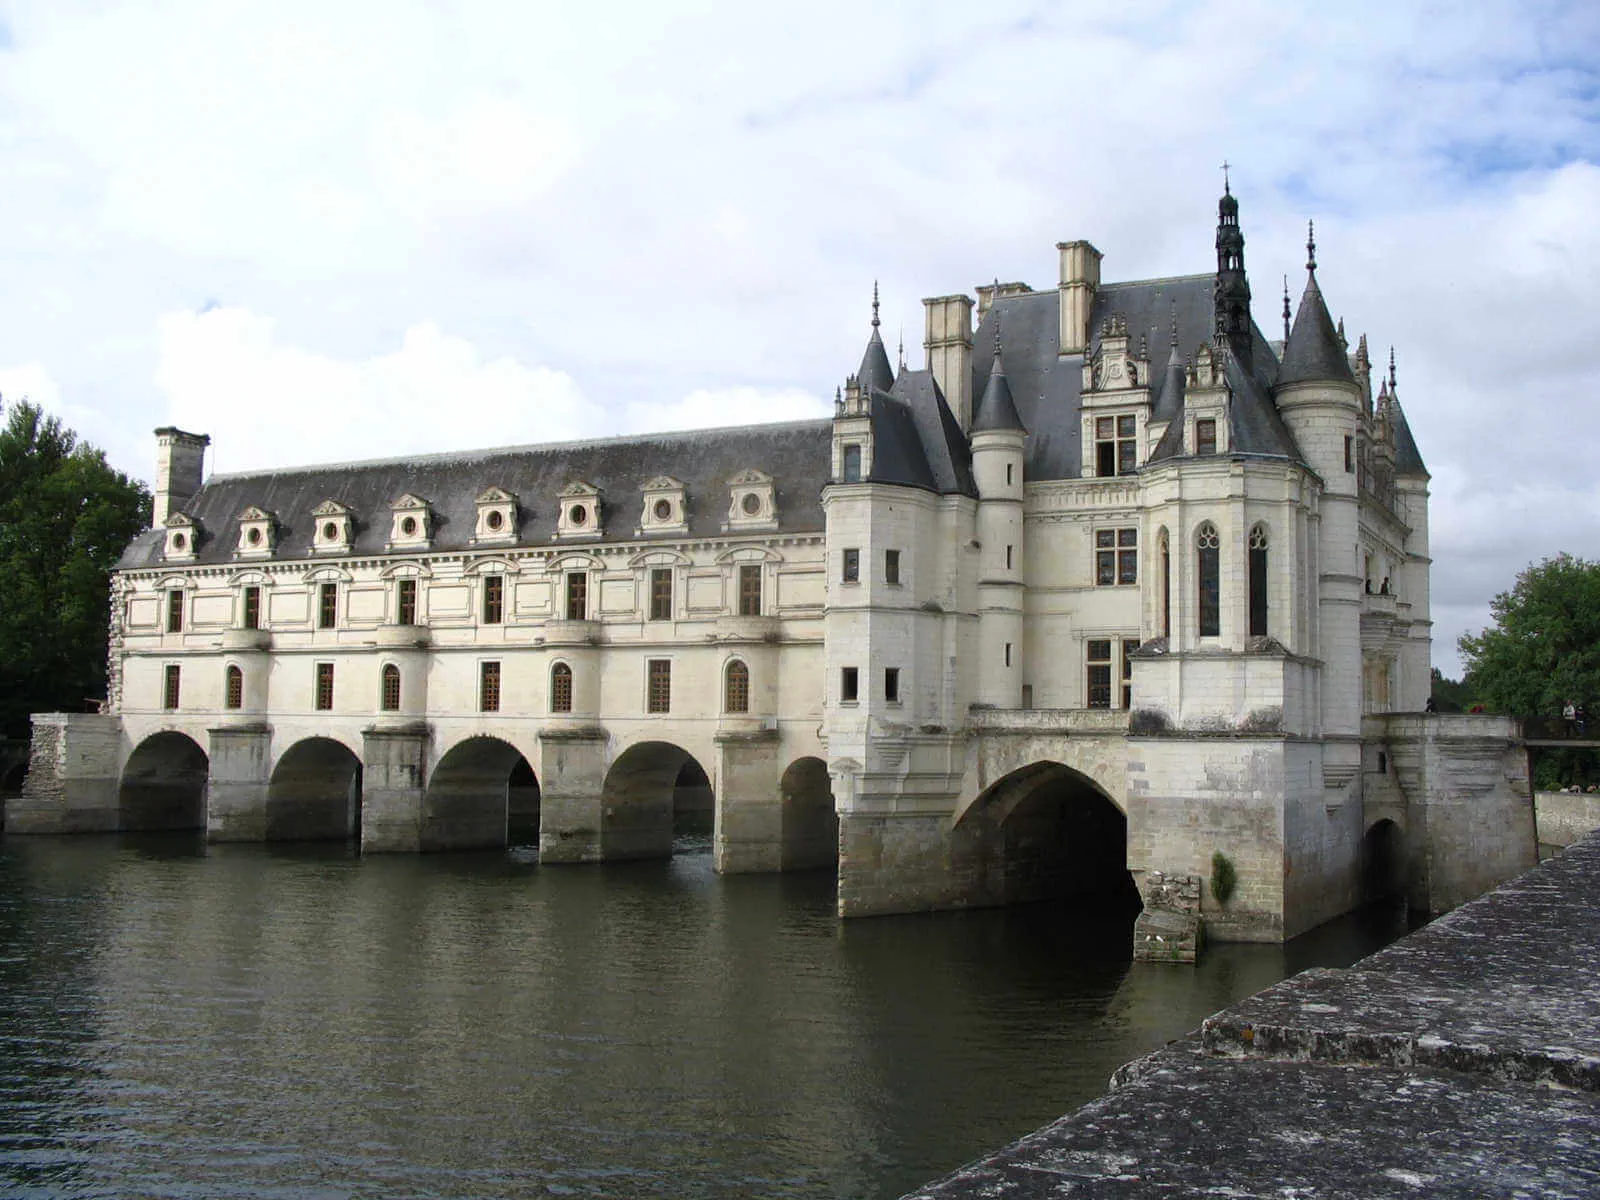 Chenonceau, designed by women, has a striking setting and dramatic history